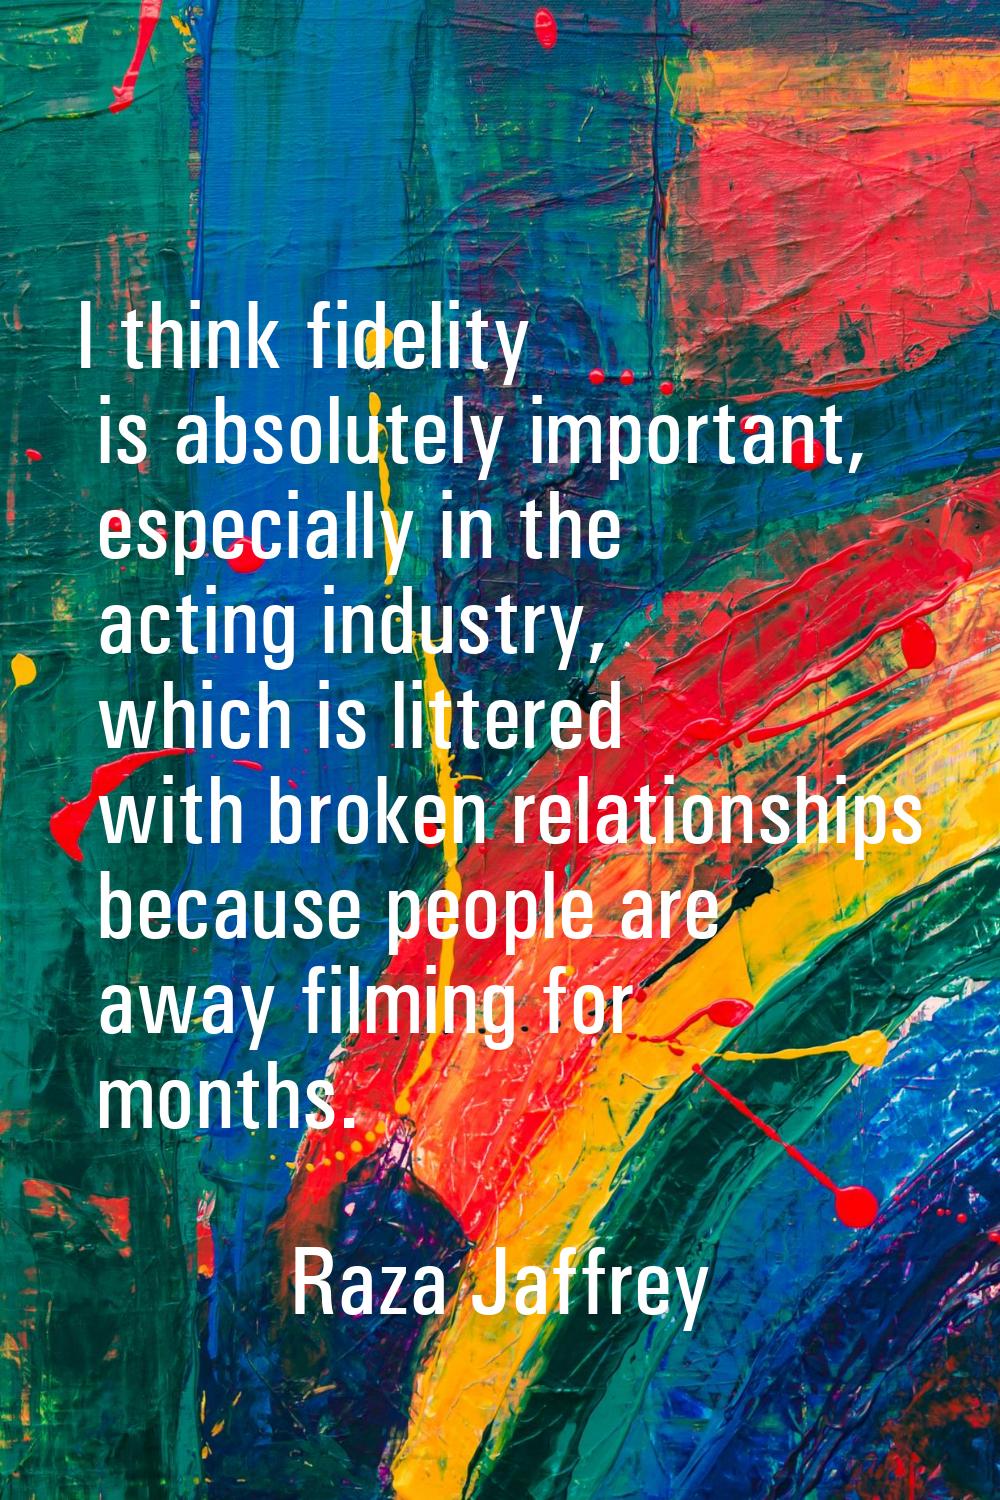 I think fidelity is absolutely important, especially in the acting industry, which is littered with